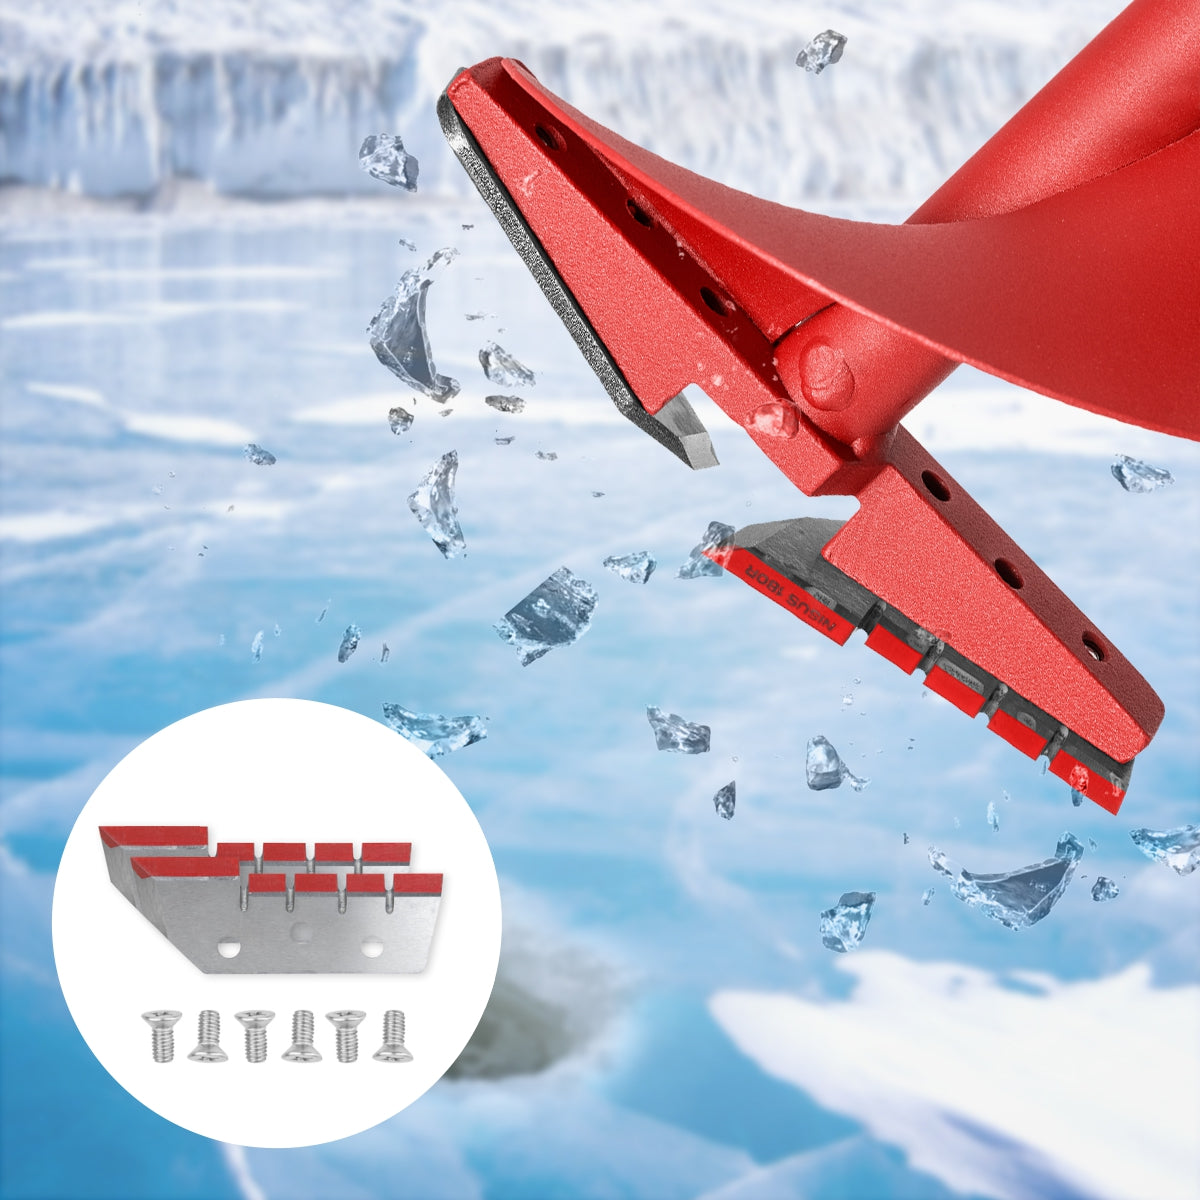 Replacement Ice Auger Blades for Jiffy Torch Ice Auger, Jiffy Hand Auger,  Buran, Tornado, Motoshtorm, Classic Augers